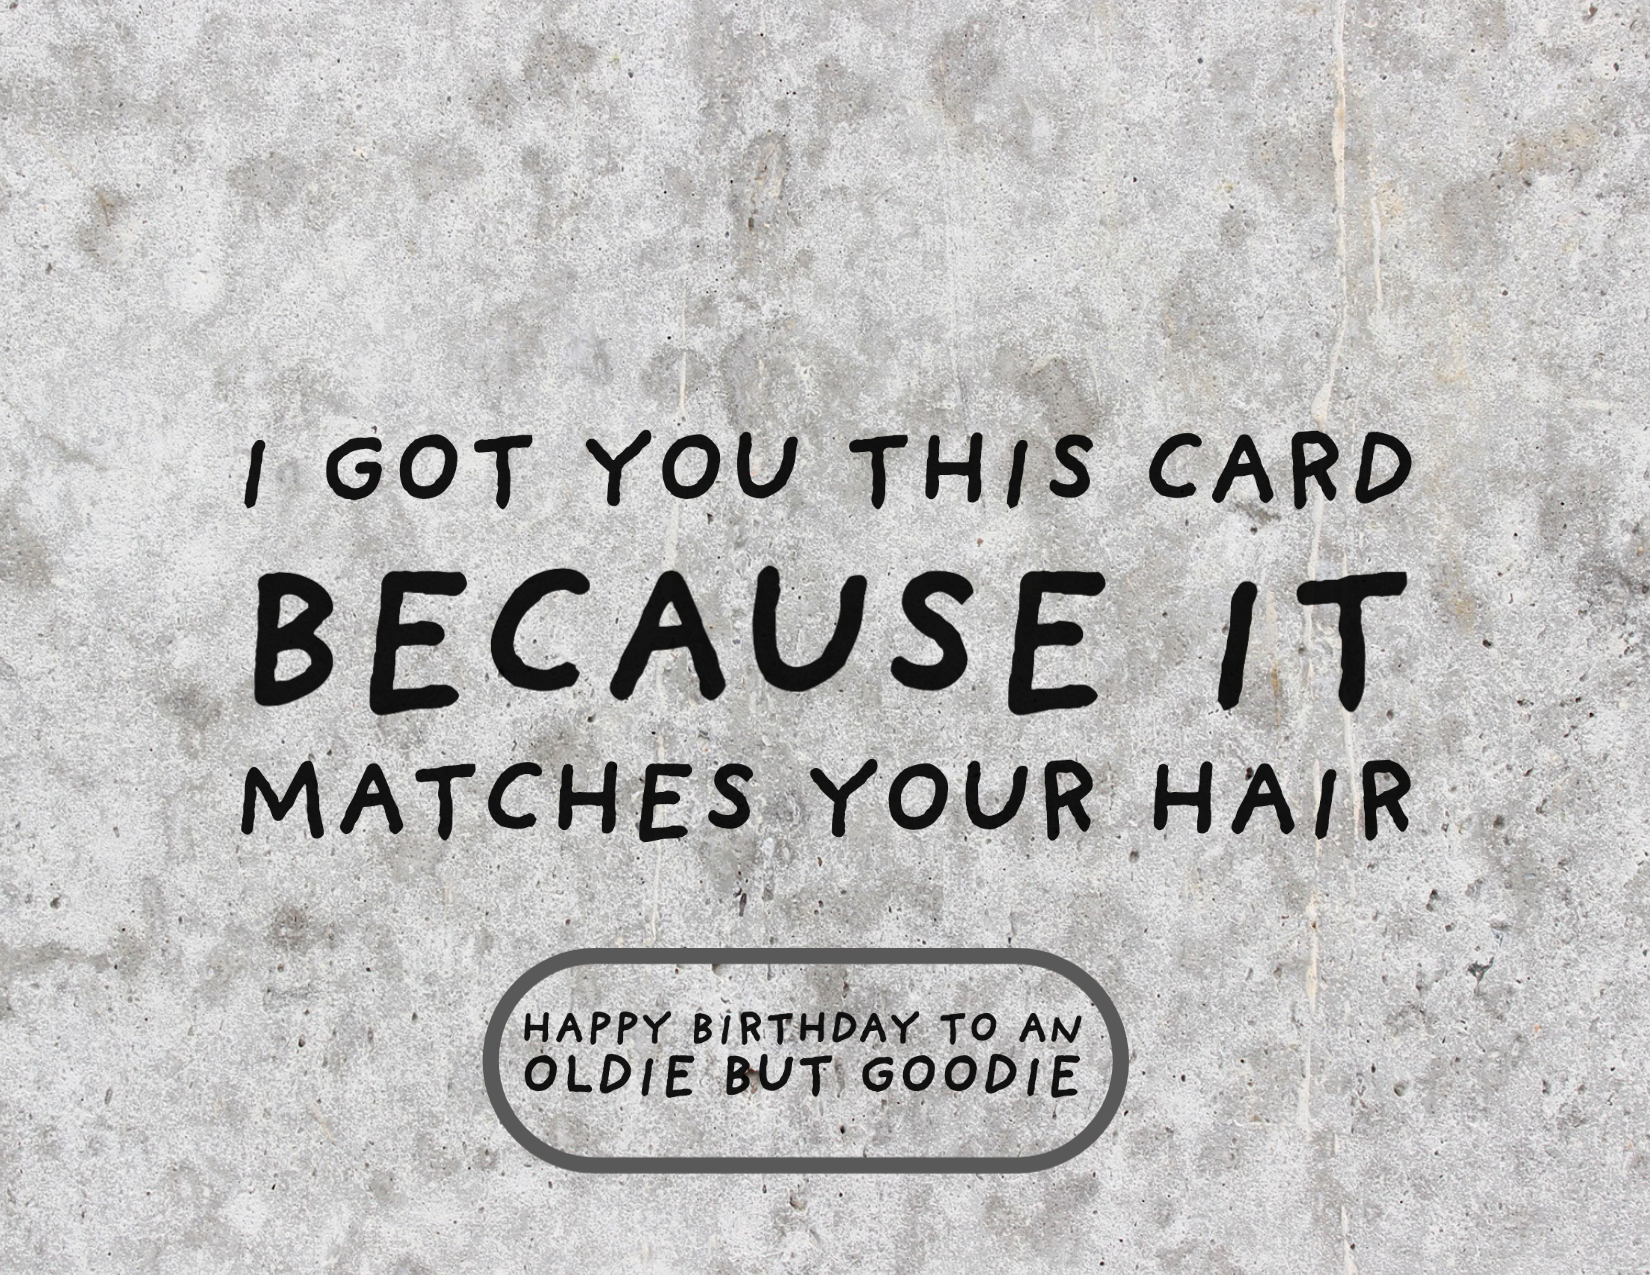 Matches Your Hair Card